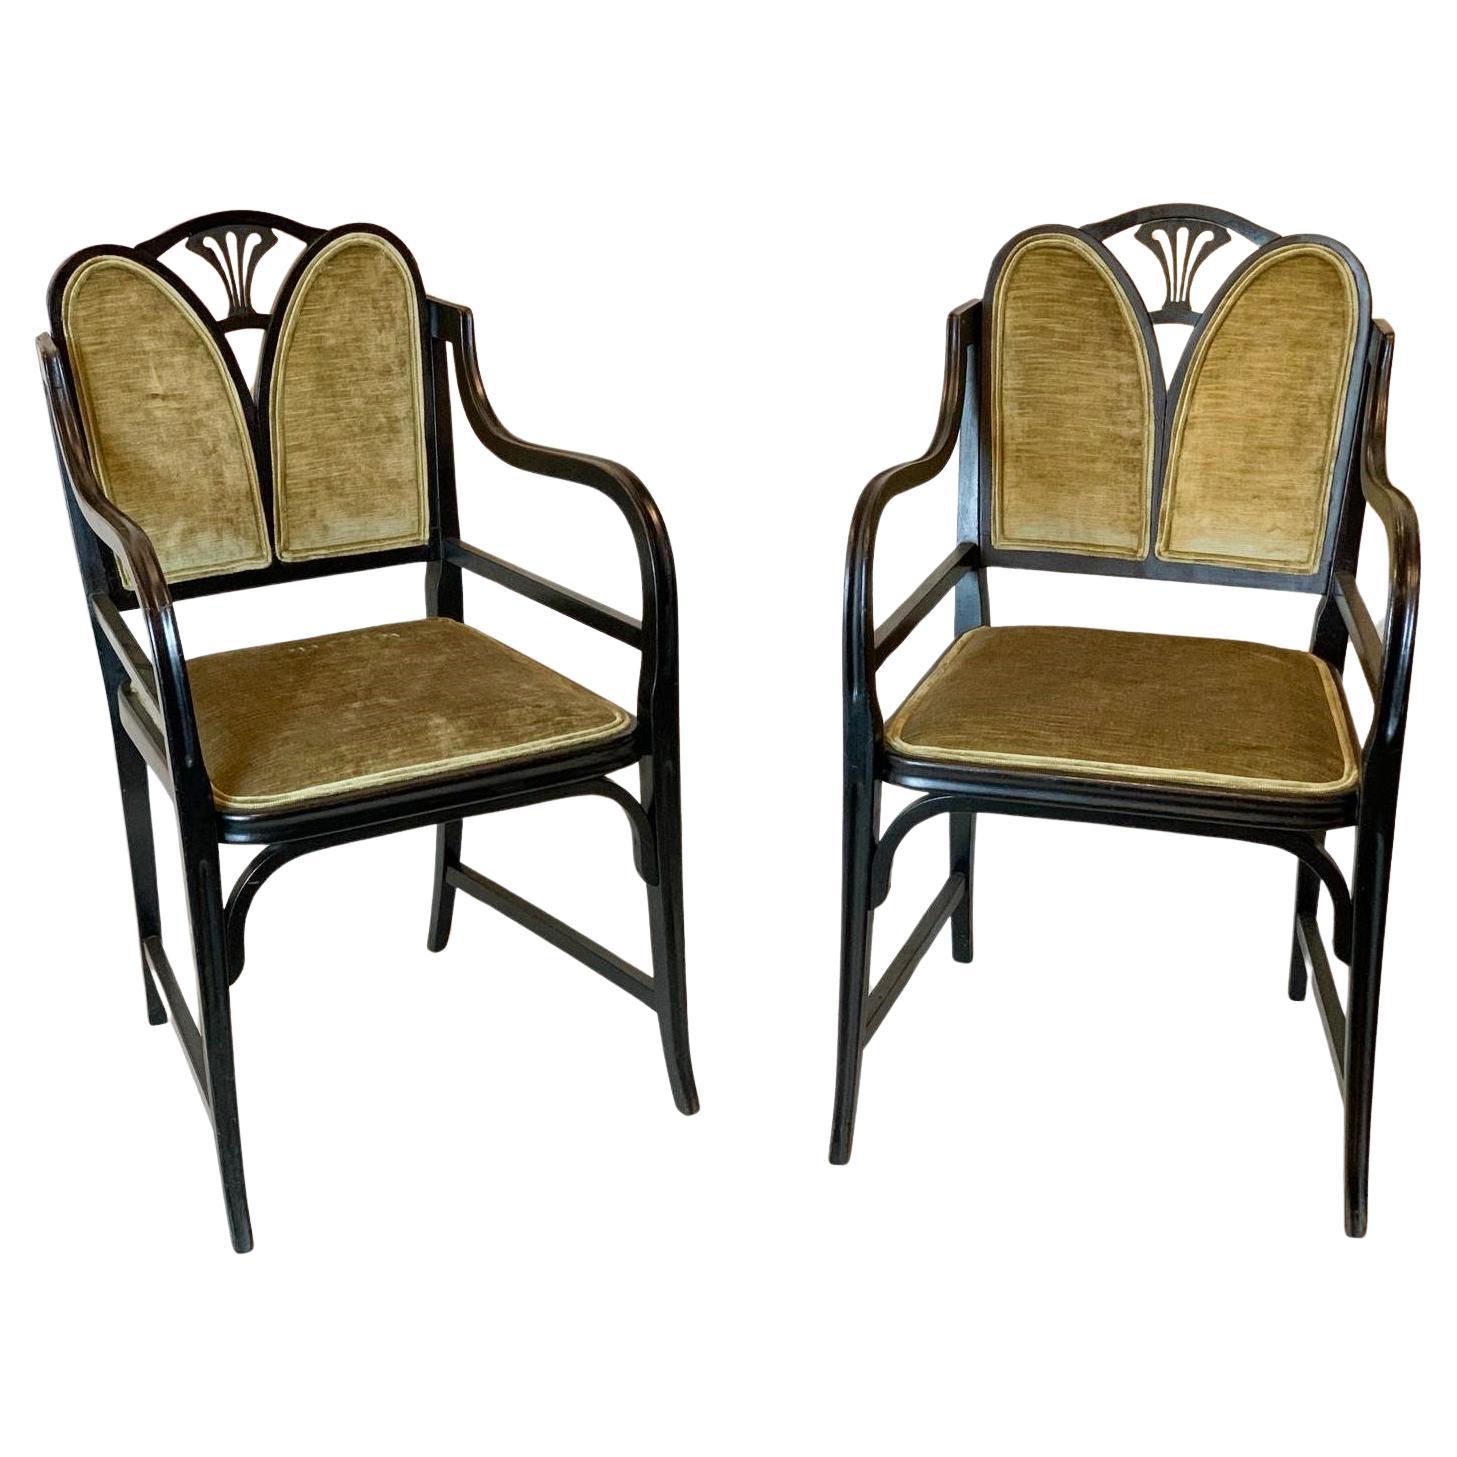 Pair Of Art Nouveau Thonet Armchairs - Black Lacquered Bentwood and Velvet